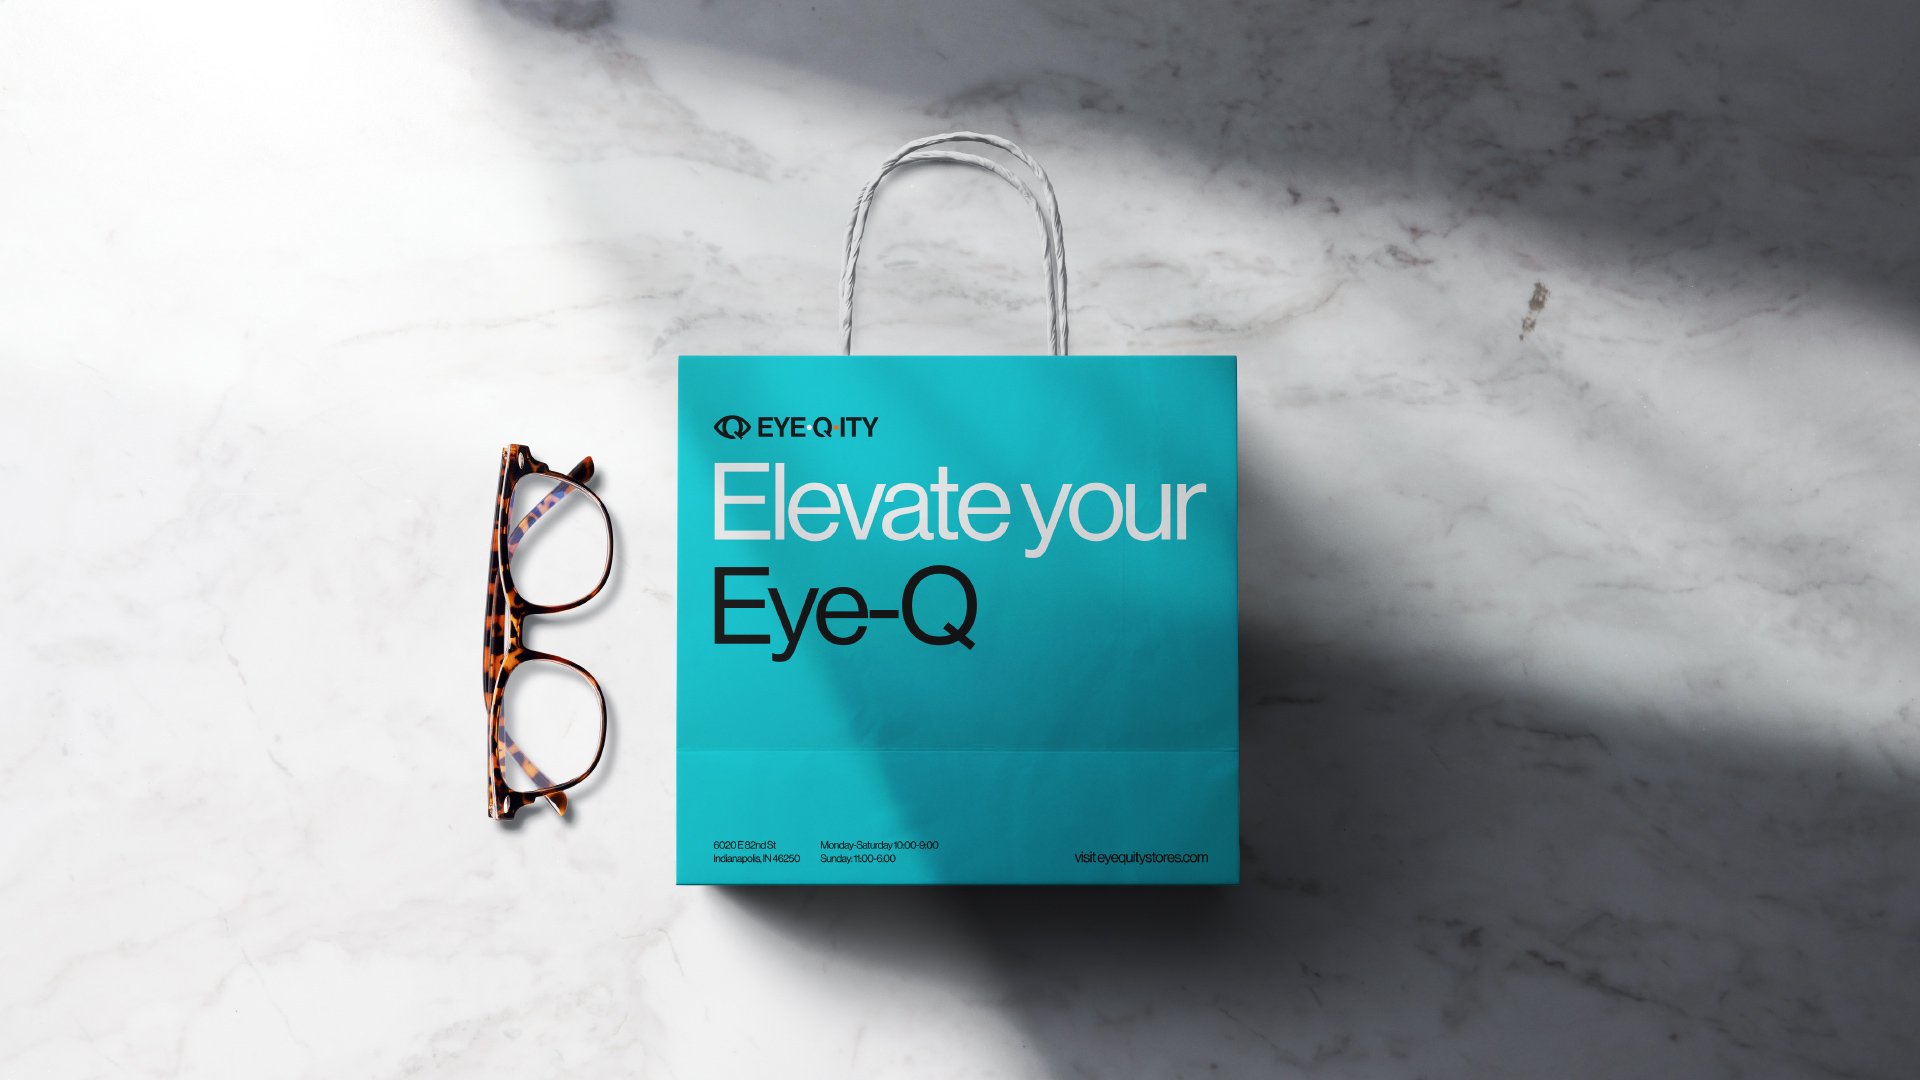 Glasses sit next to an EYEQ.ITY bag. It says, “Elevate your Eye-Q” with the logo above it and the contact information and address below it. Both the bag and the glasses are on top of a marble surface.